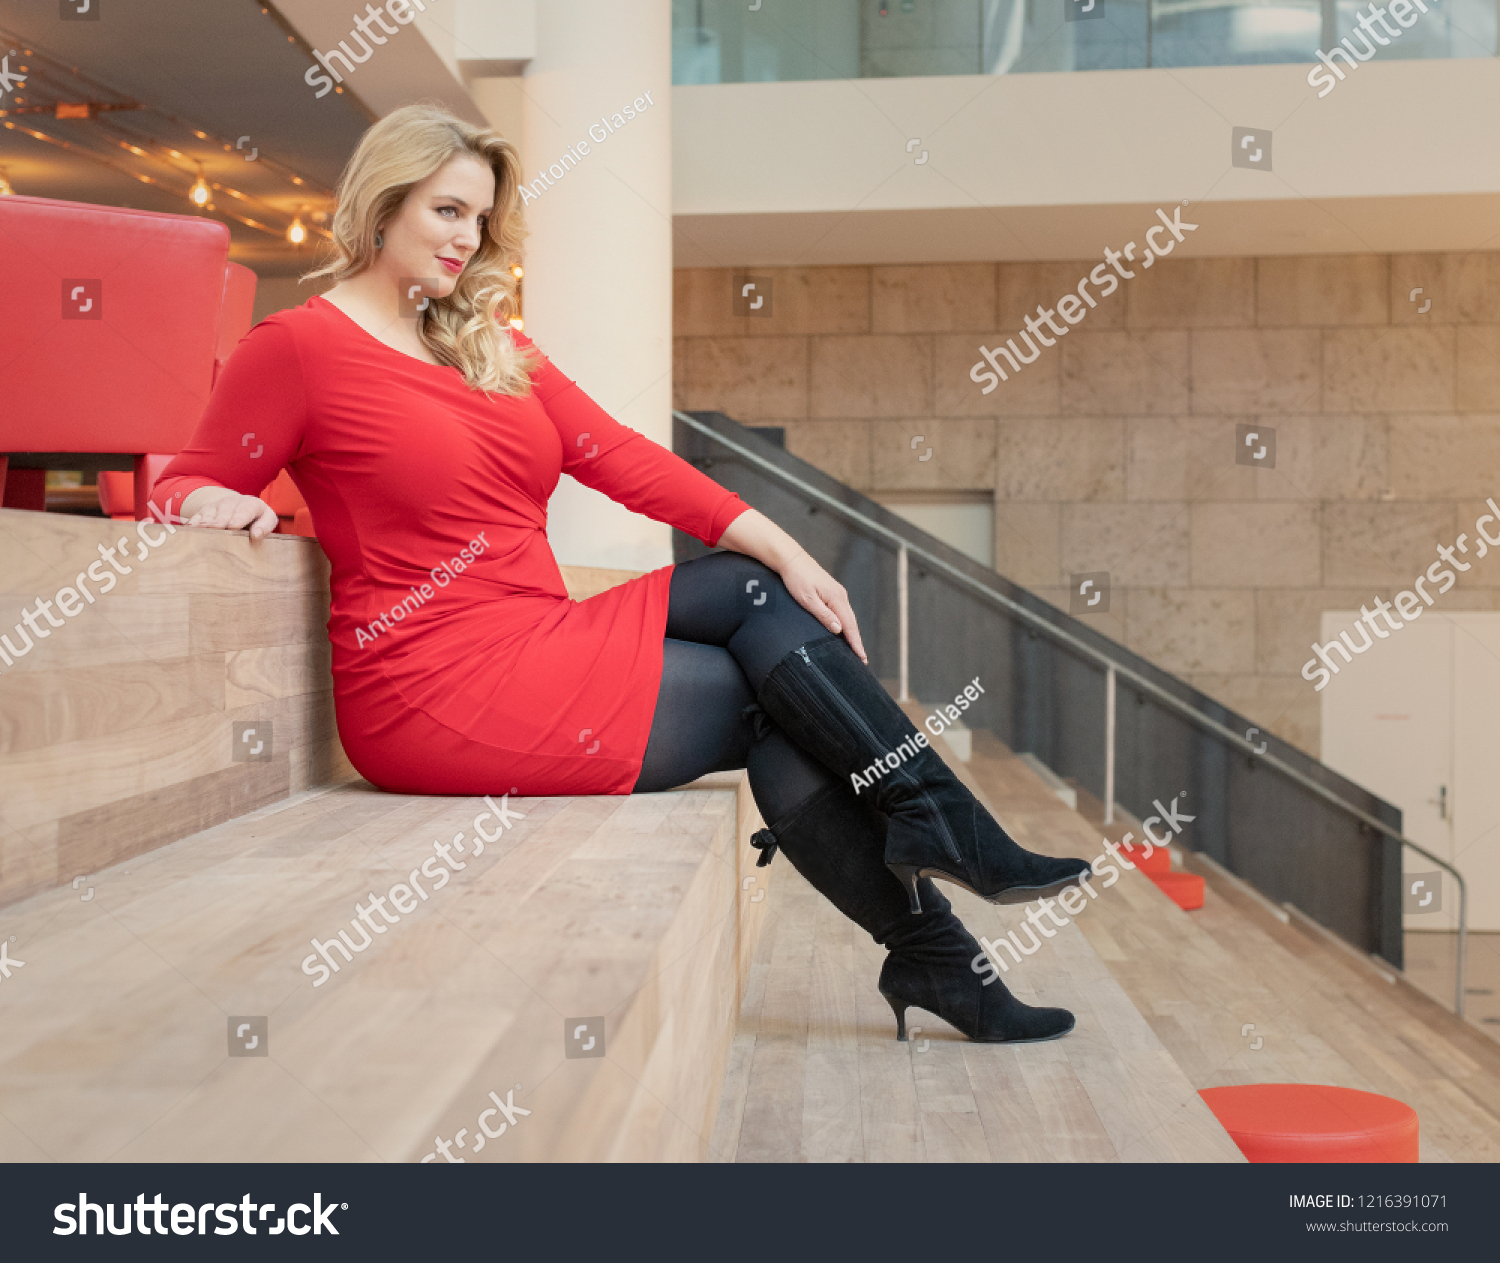 red dress and black boots